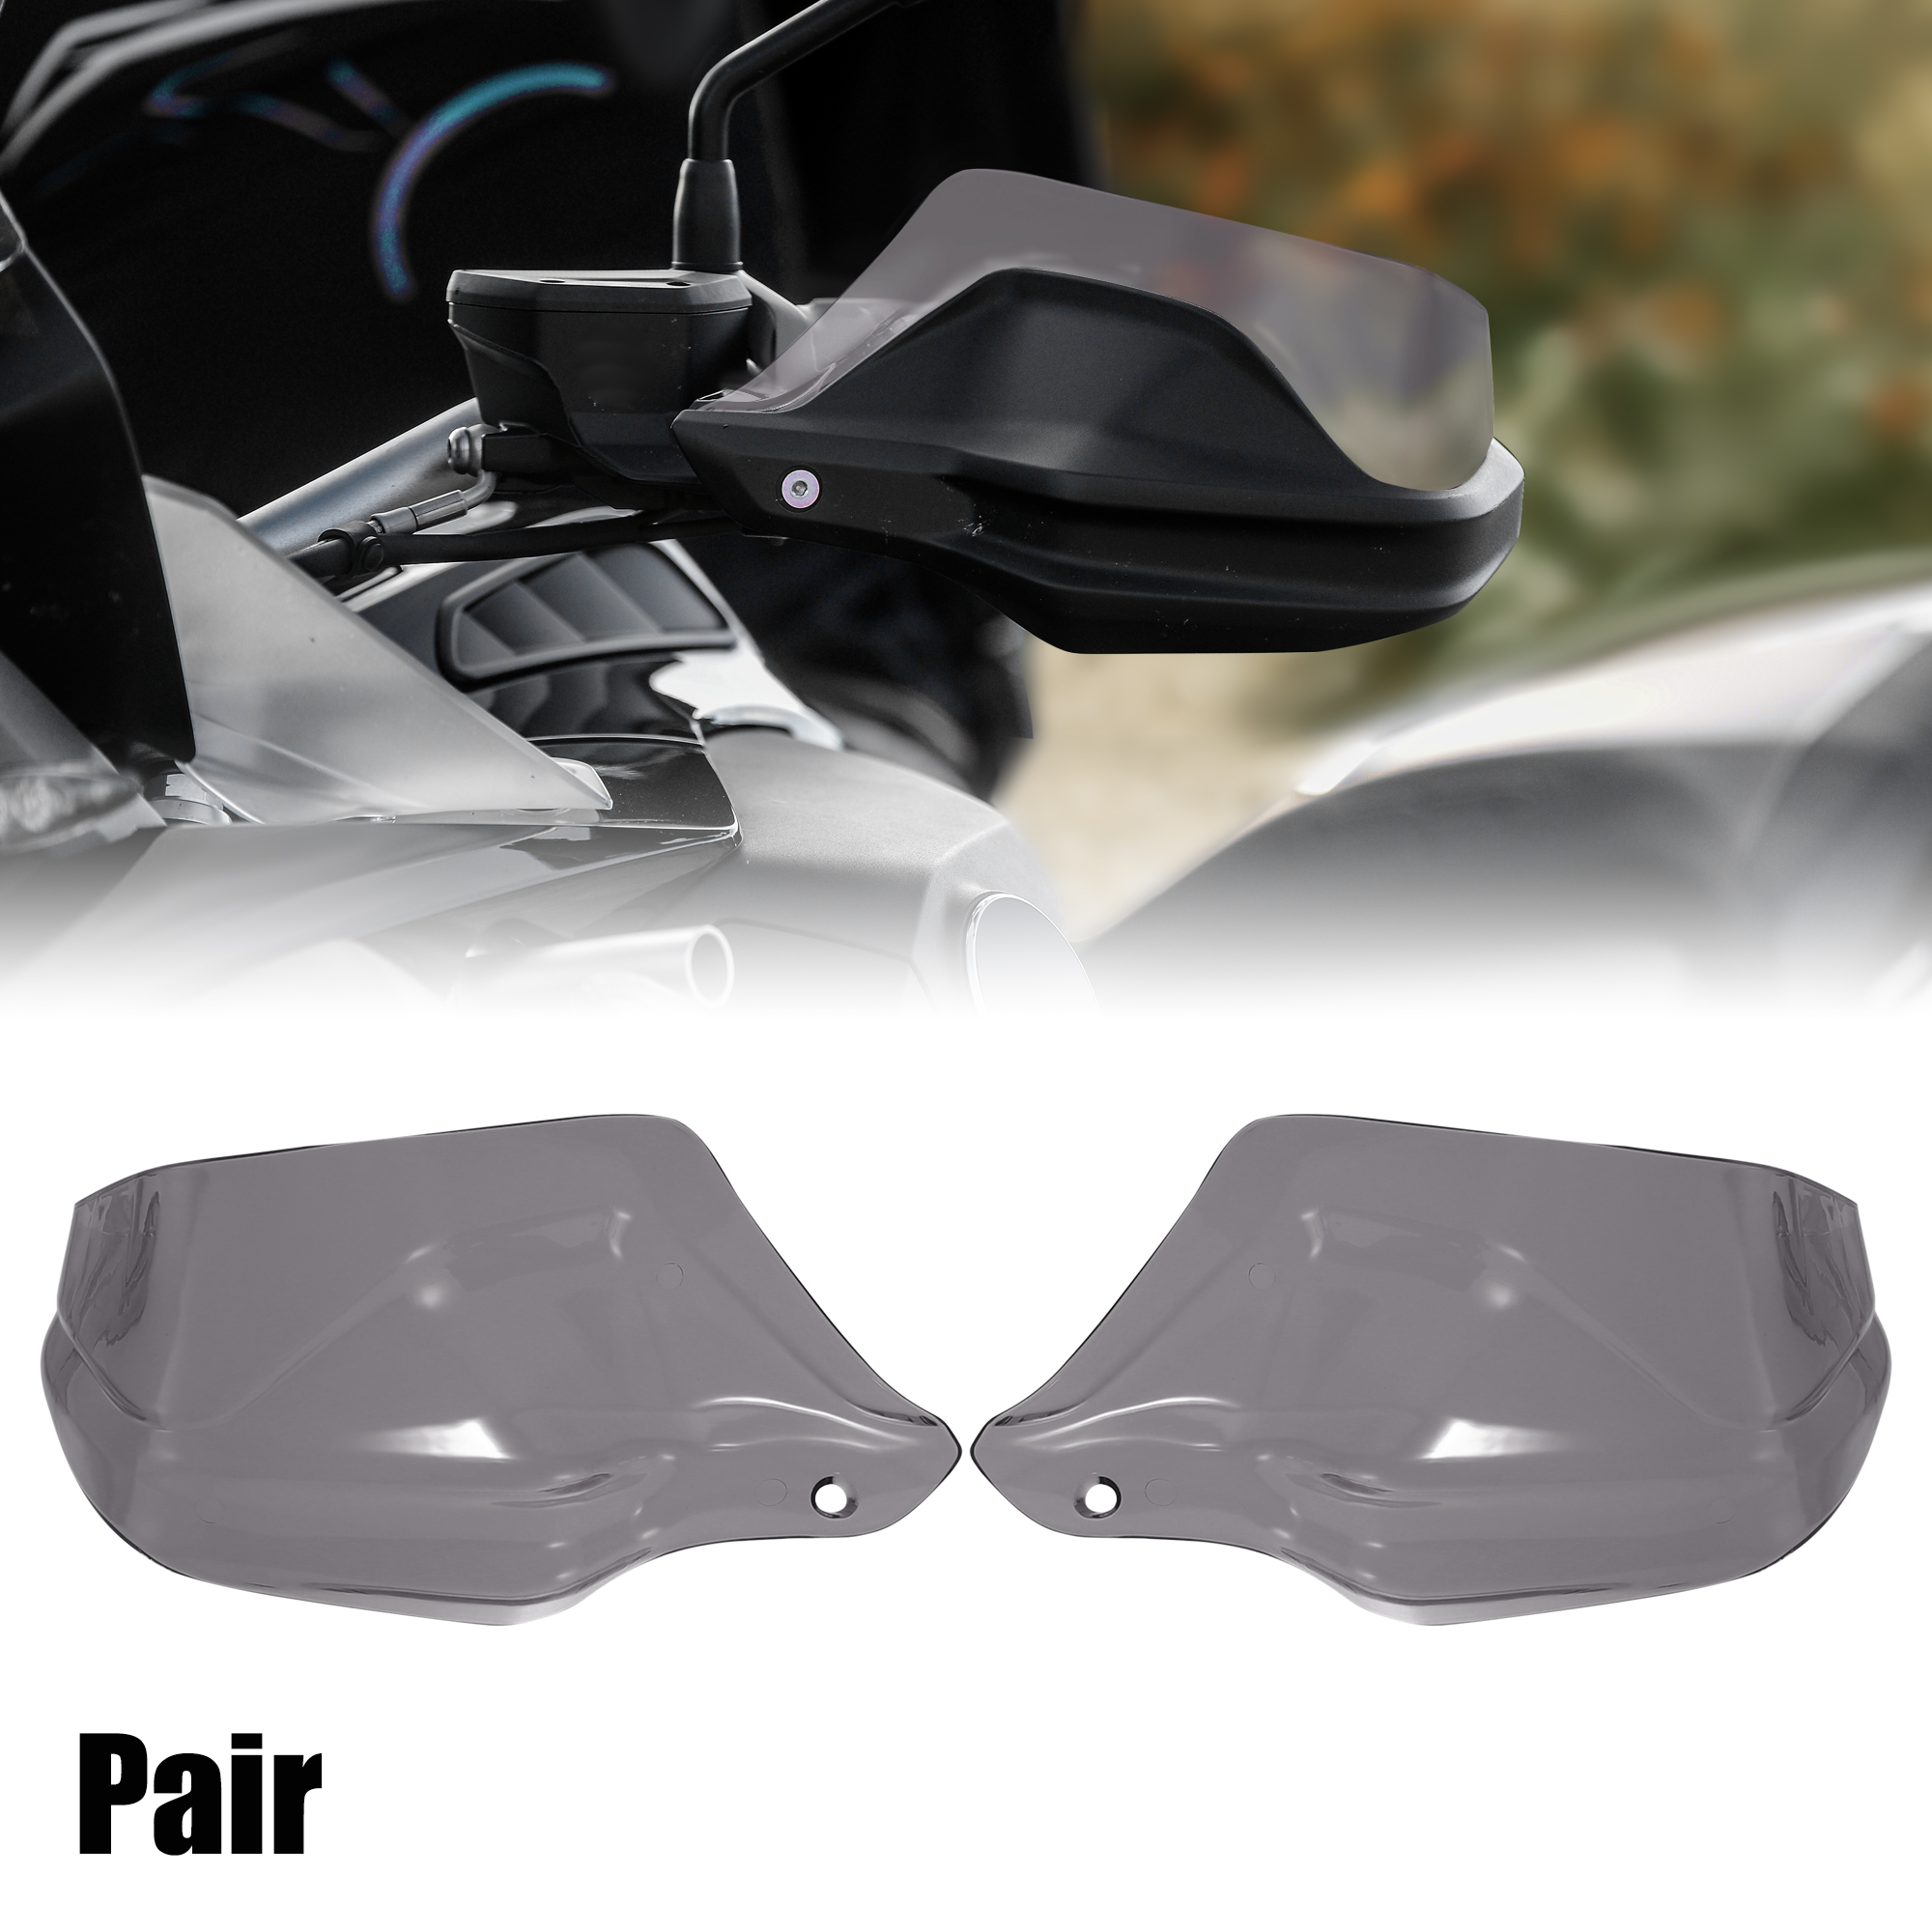 Unique Bargains Pair Handguard Protector for BMW R1250GS Windshield Guard Protector Smoked Color